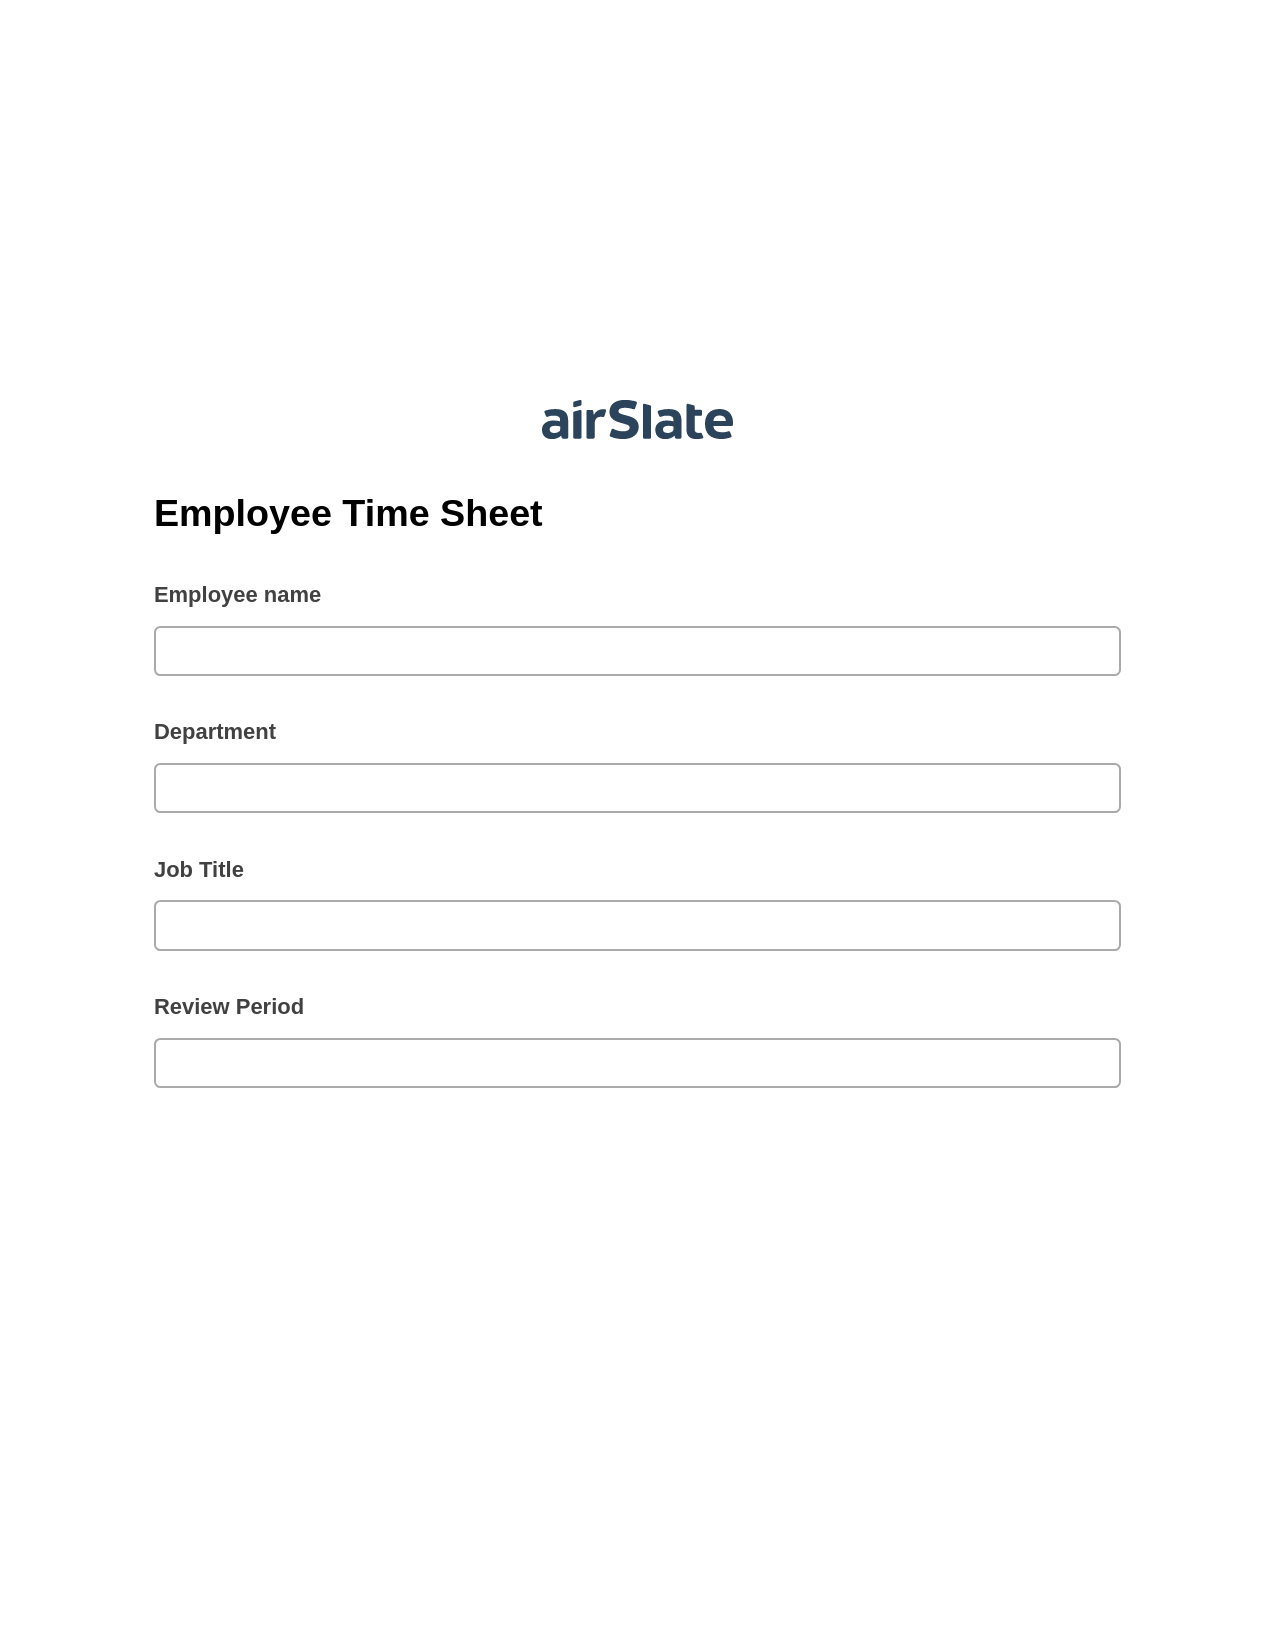 Multirole Employee Time Sheet Pre-fill from Salesforce Records Bot, Rename Slate Bot, Export to Excel 365 Bot